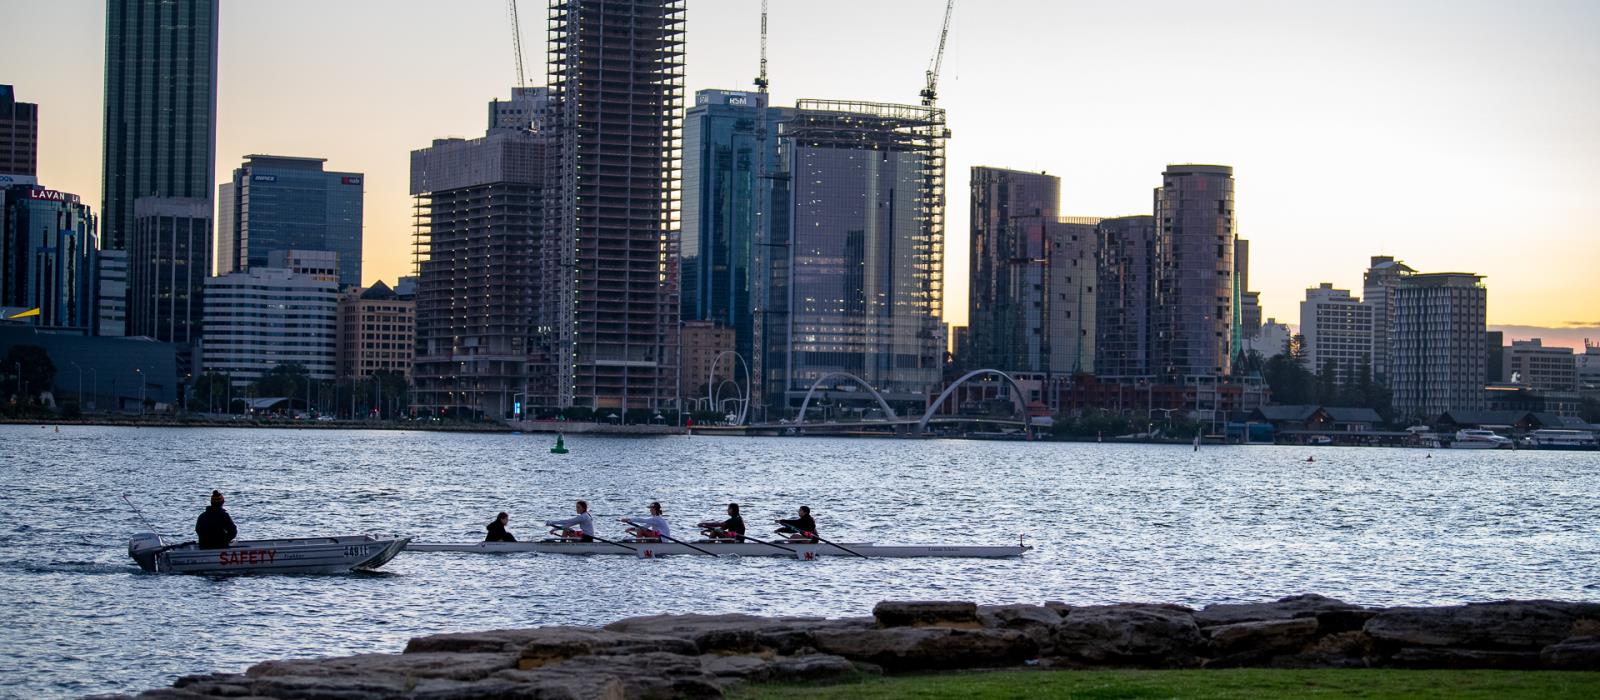 Rowing on the Swan River with the City of Perth cityscape